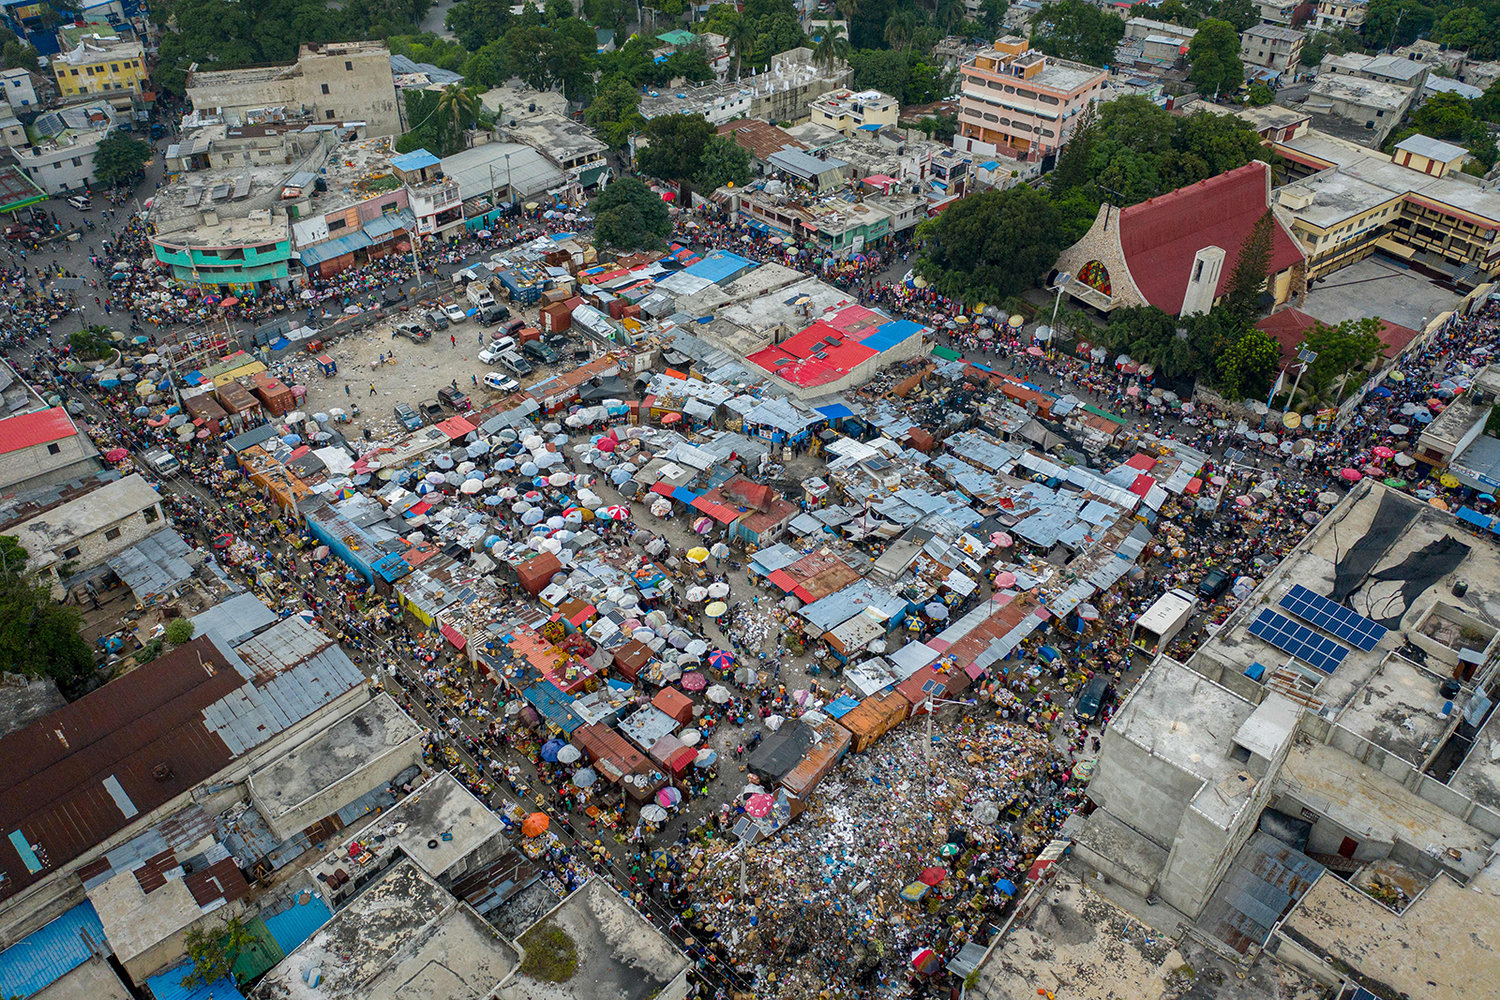 An aerial view shows a street market in Port-au-Prince, Haiti, on Oct. 29, 2021. (Ricardo Arduengo/AFP via Getty Images/TNS)